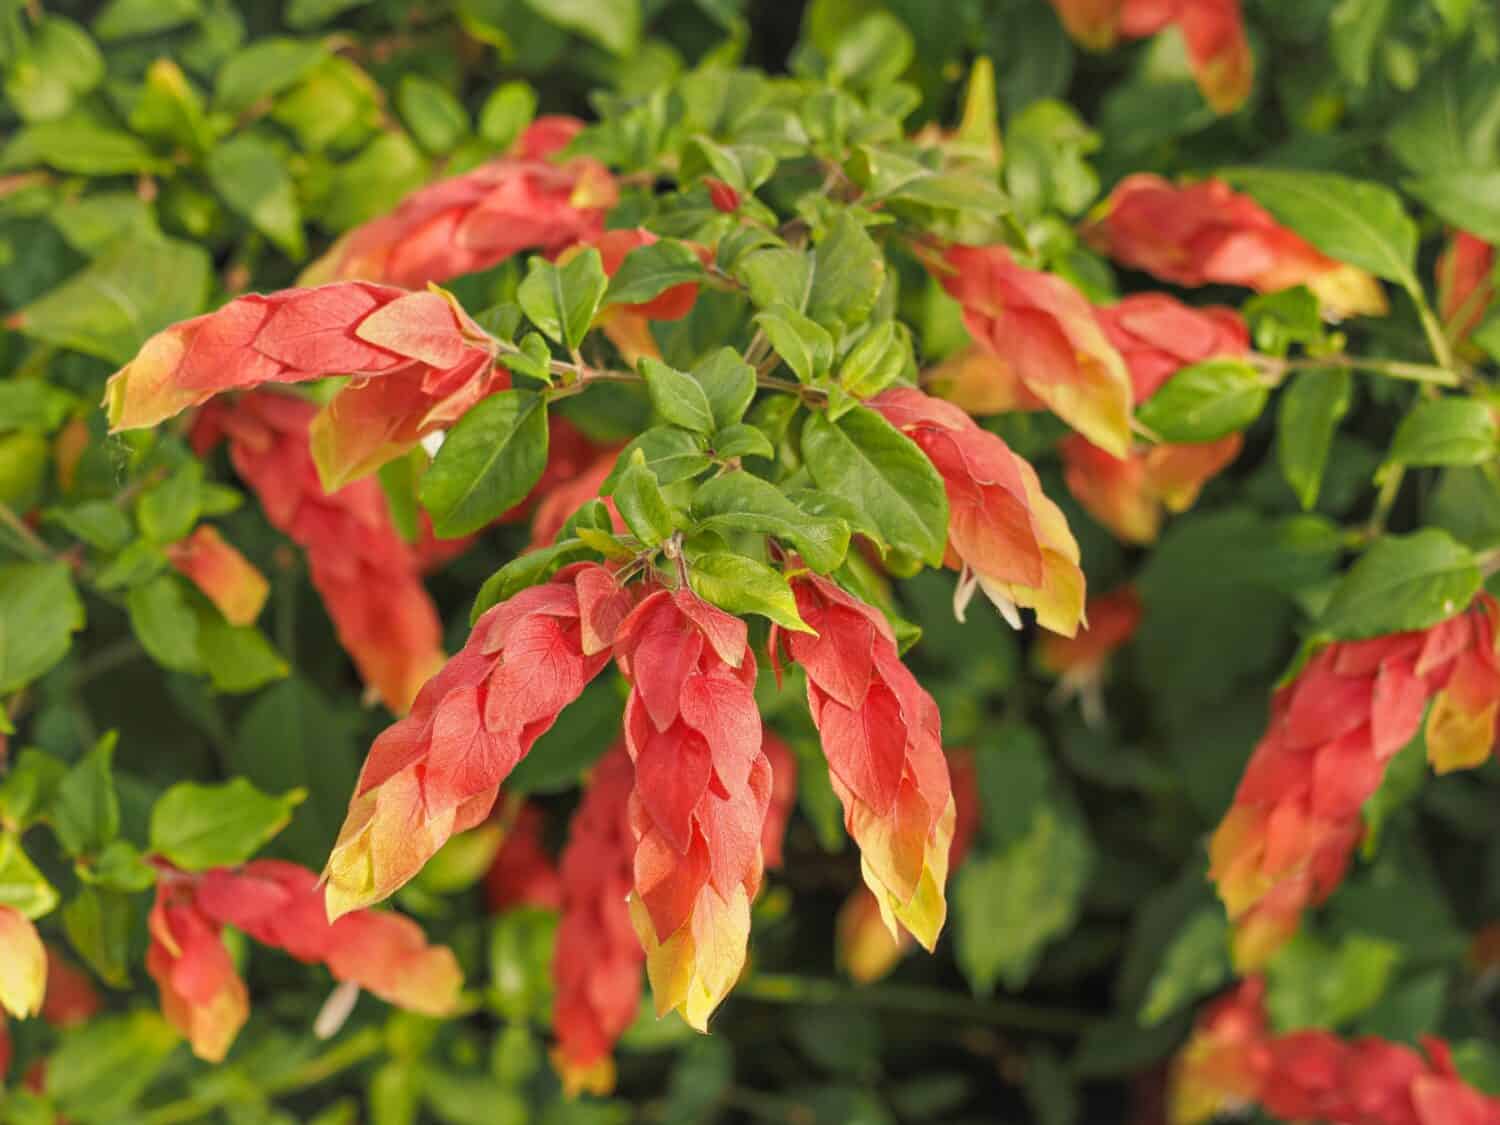 Mexican shrimp plant, long colorful bracts which look somewhat like shrimps and green leaves, close up. Justicia brandegeeana or False Hop is evergreen shrub, flowering plant of the family Acanthaceae